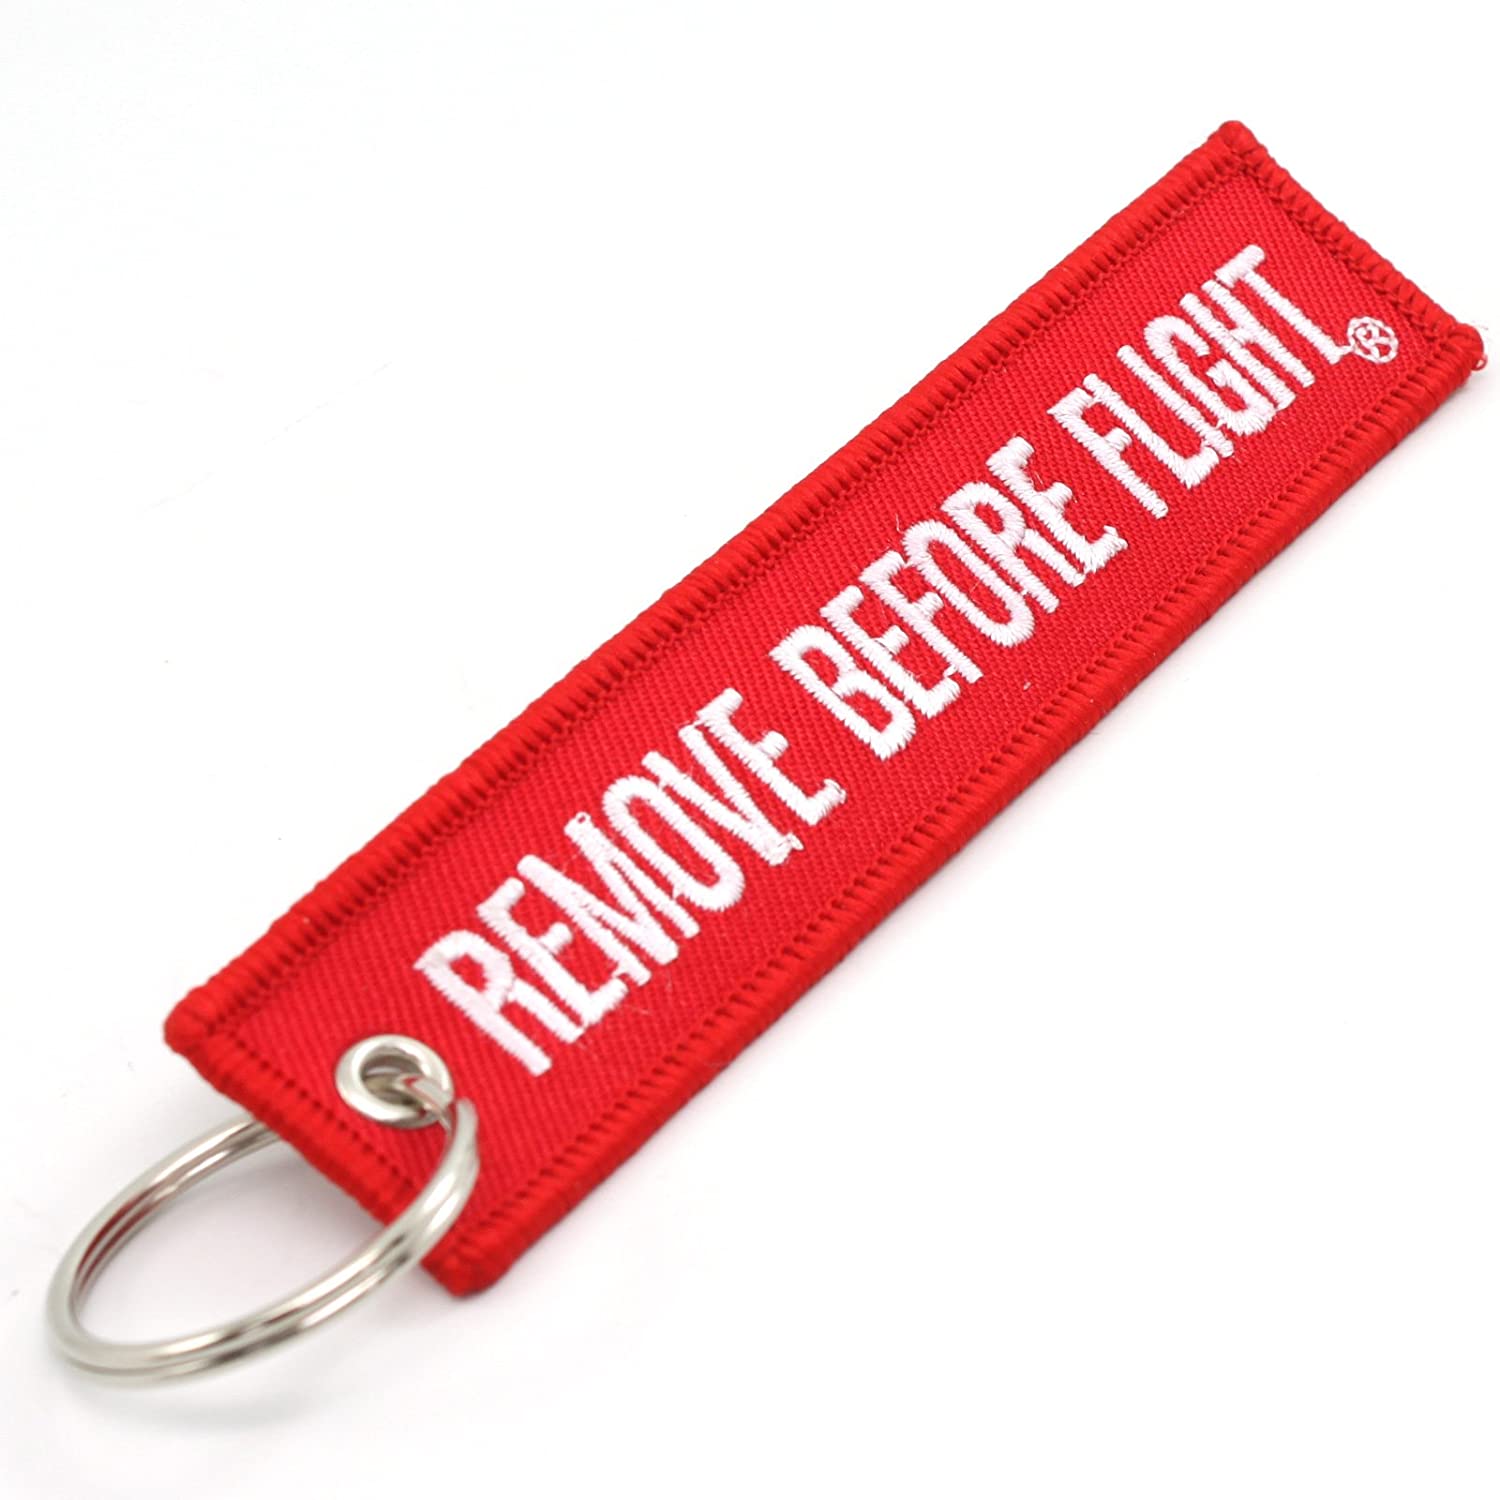 Remove Before Flight Key Chain – Red/White 1pc by Rotary13B1